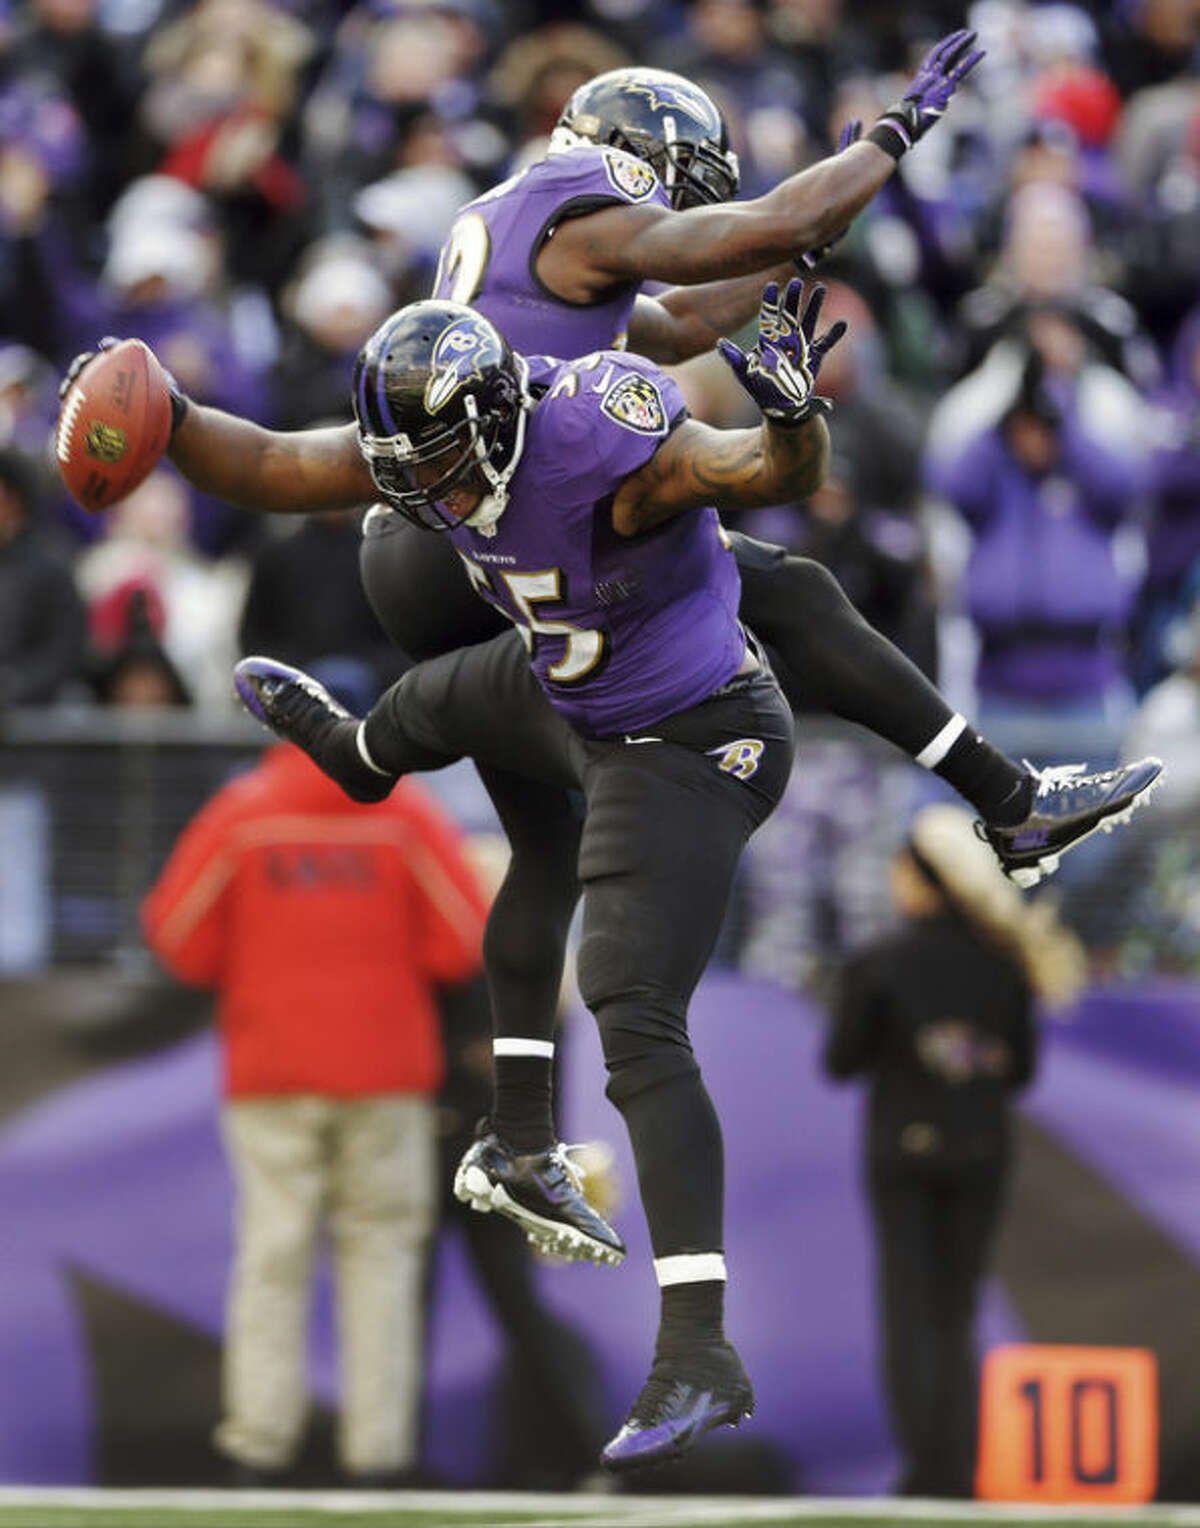 Baltimore Ravens outside linebacker Terrell Suggs (55) celebrates his fumble recovery with teammate strong safety James Ihedigbo during the first half of an NFL football game against the New York Jets in Baltimore, Md., Sunday, Nov. 24, 2013. (AP Photo/Patrick Semansky)